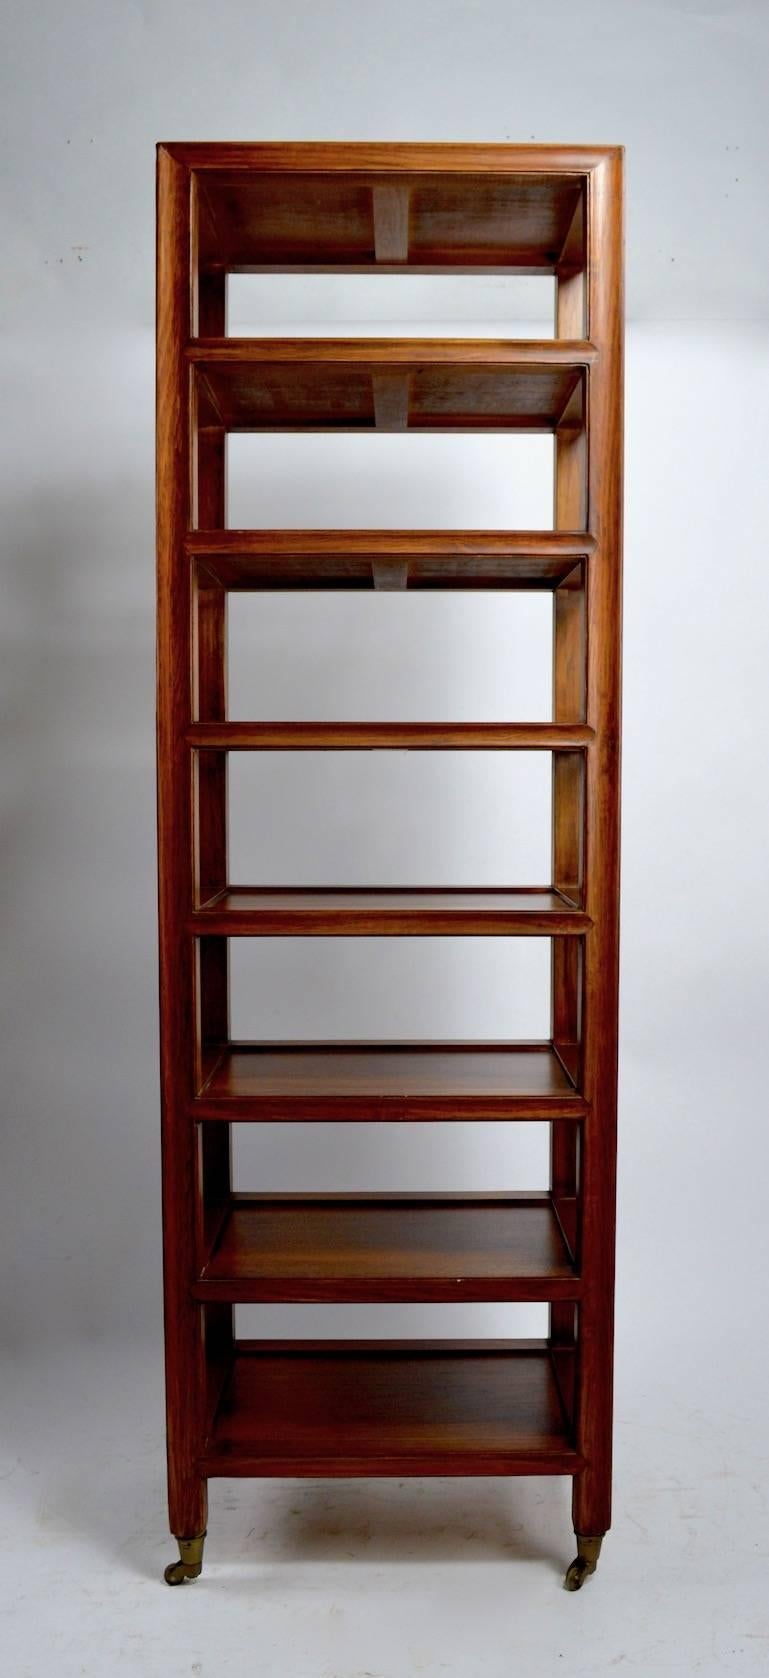 Interesting solid wood (mahogany) etagere comprising seven fixed shelves, on brass wheel coasters. This piece is marked 